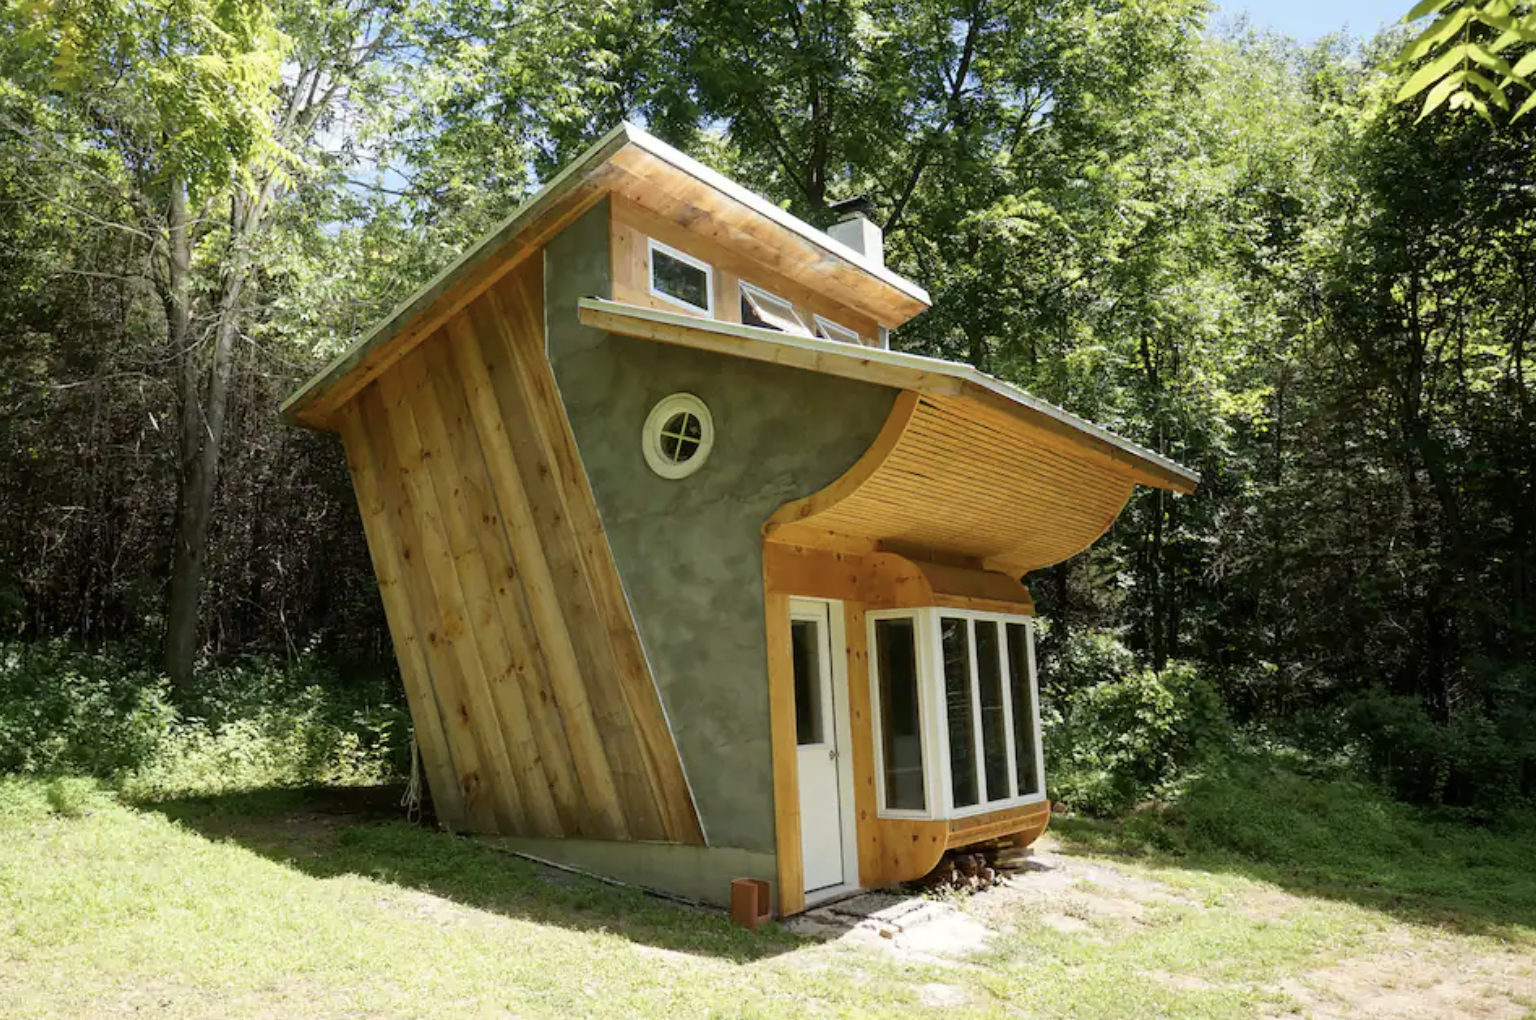 Tiny Homes Relationship Advice - 8 Couples Who Live in Tiny Homes